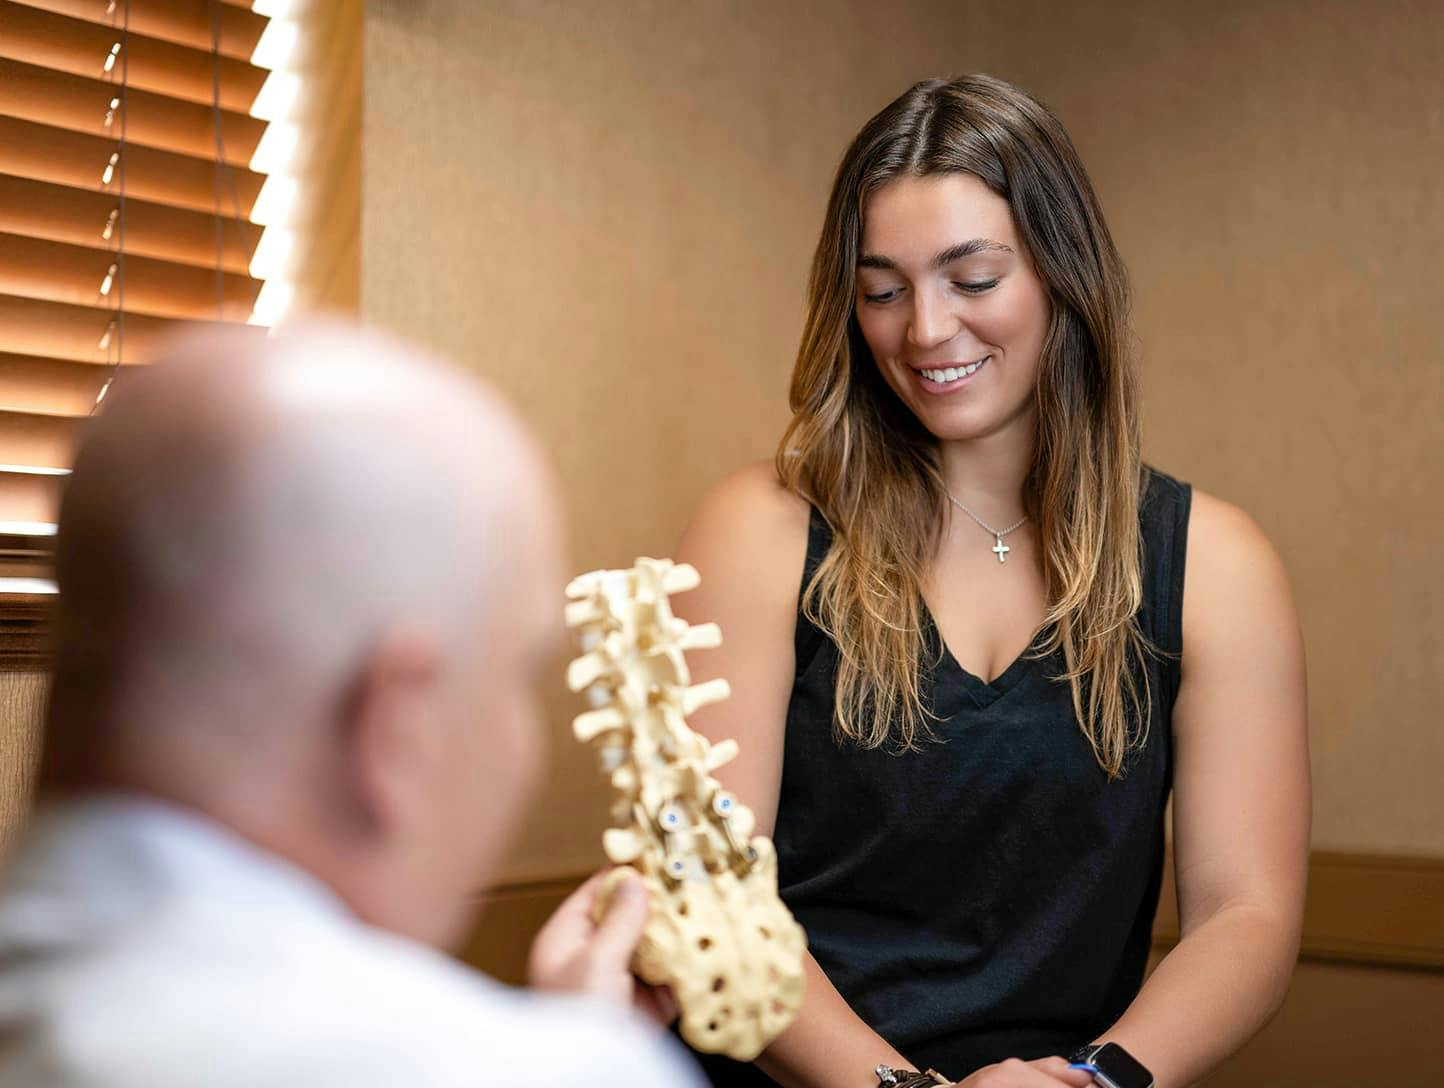 patient smiling while looking at Spine Anatomical Model